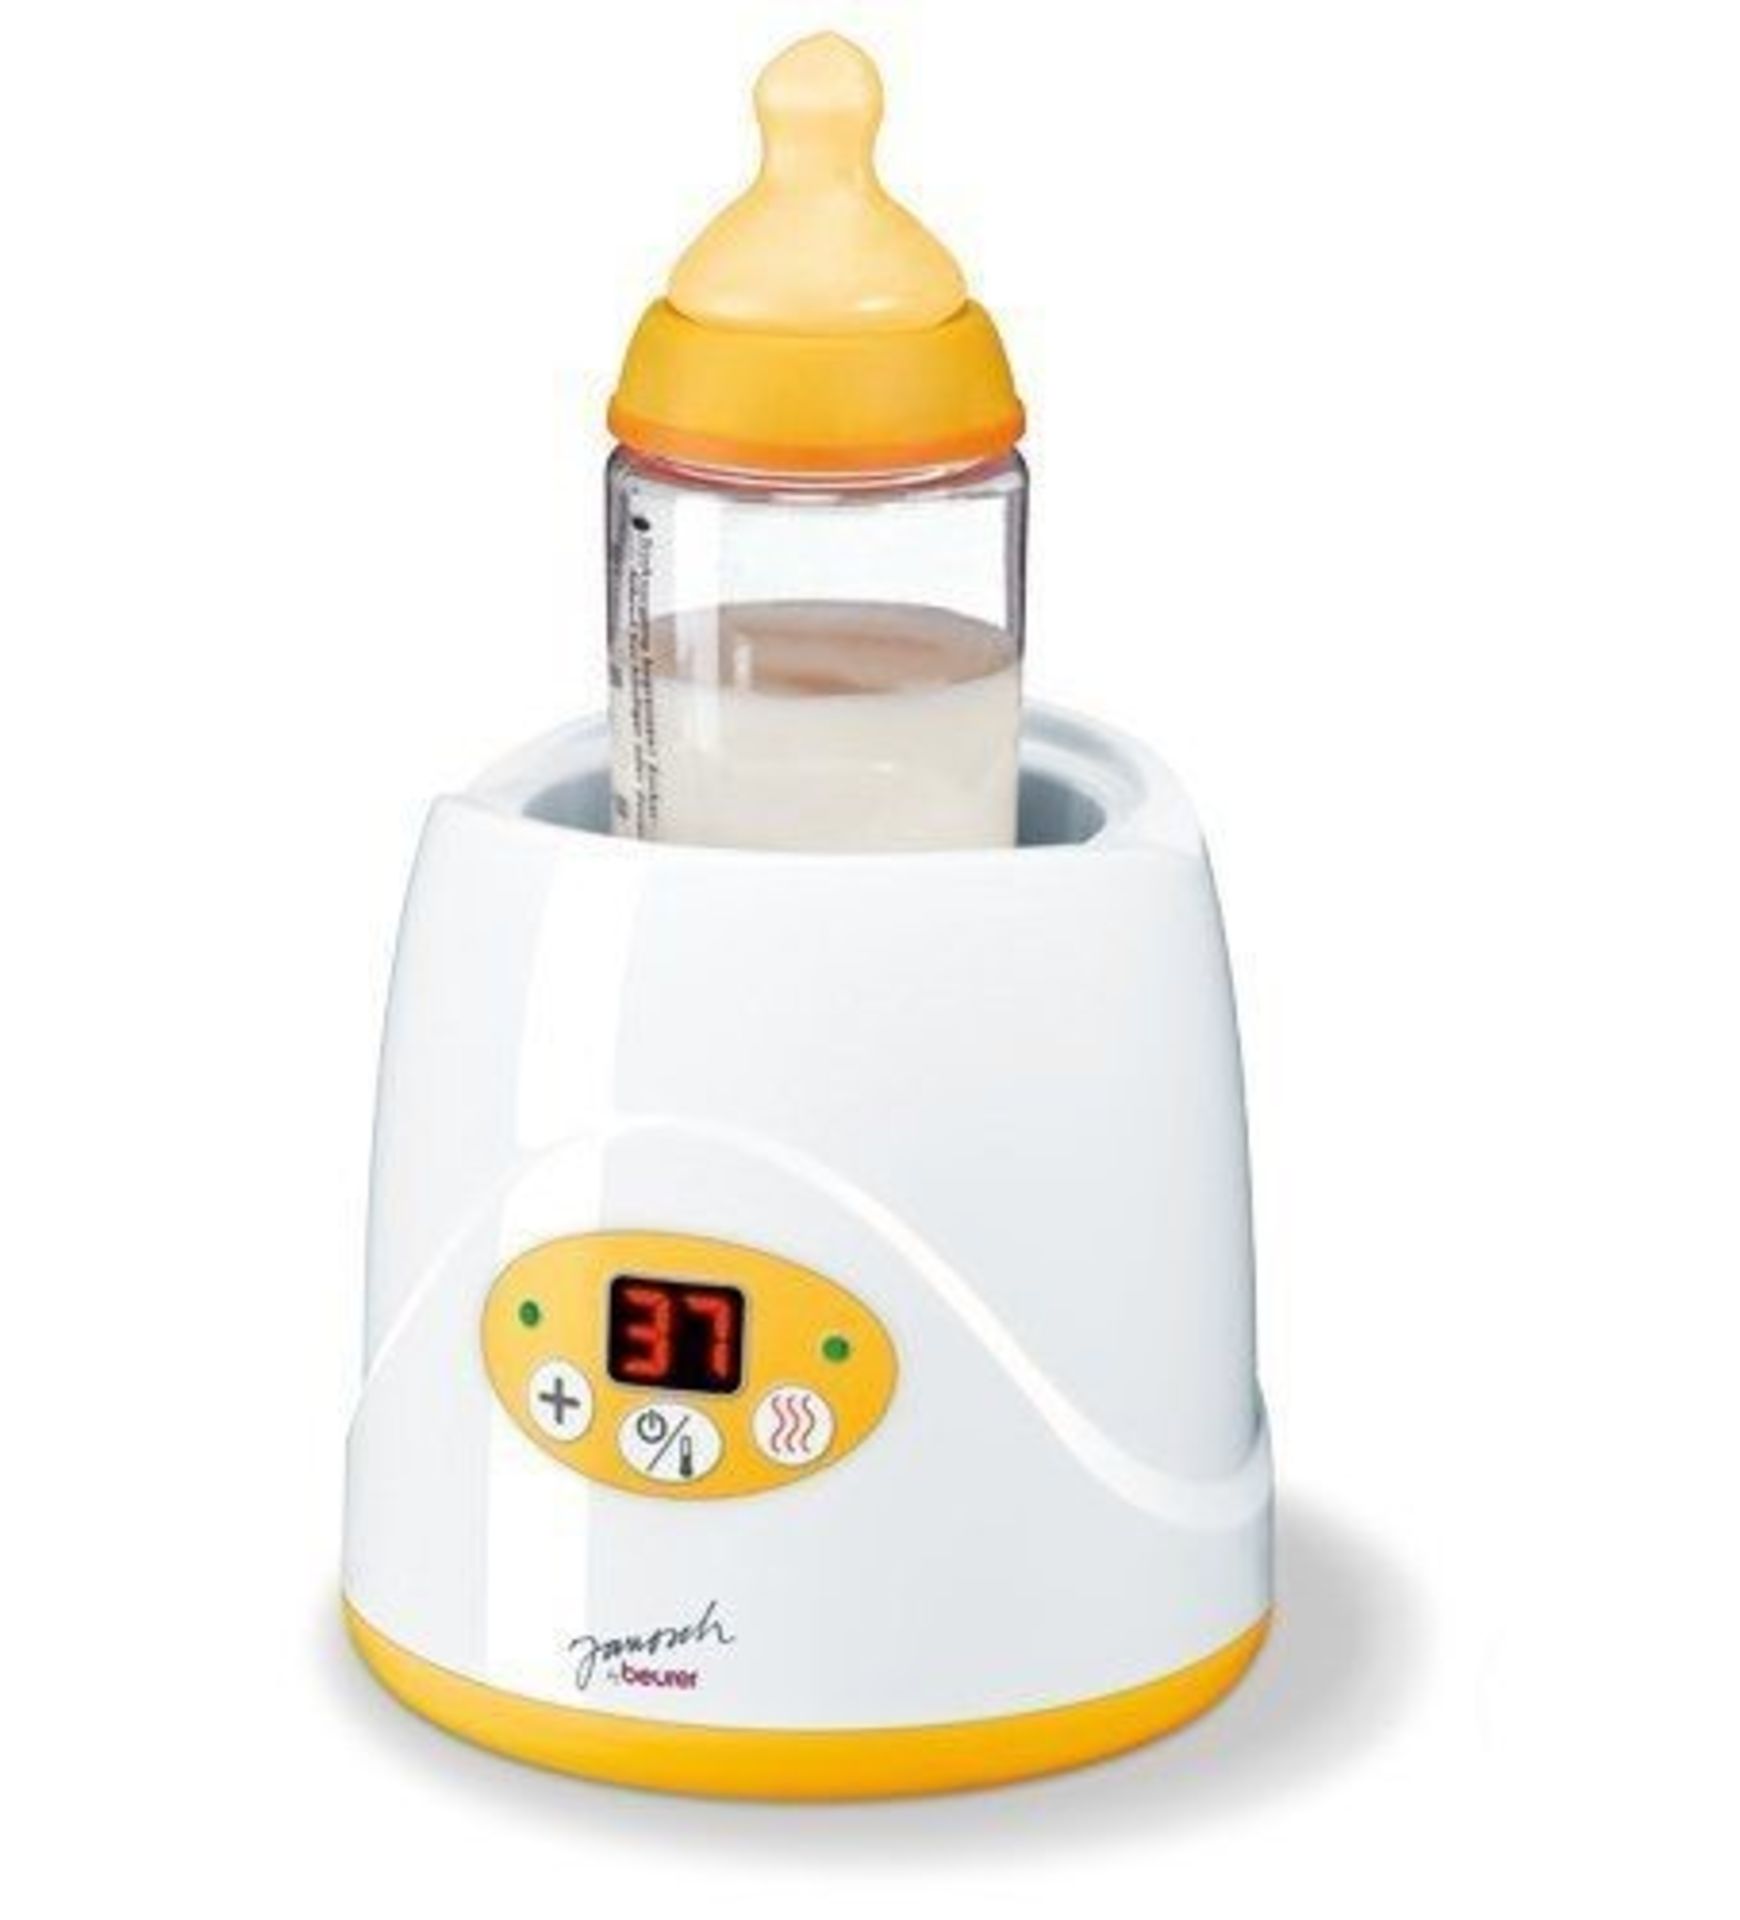 1 BOXED BEURER 2-IN-1 BABY FOOD WARMER / RRP £34.75 (VIEWING HIGHLY RECOMMENDED)